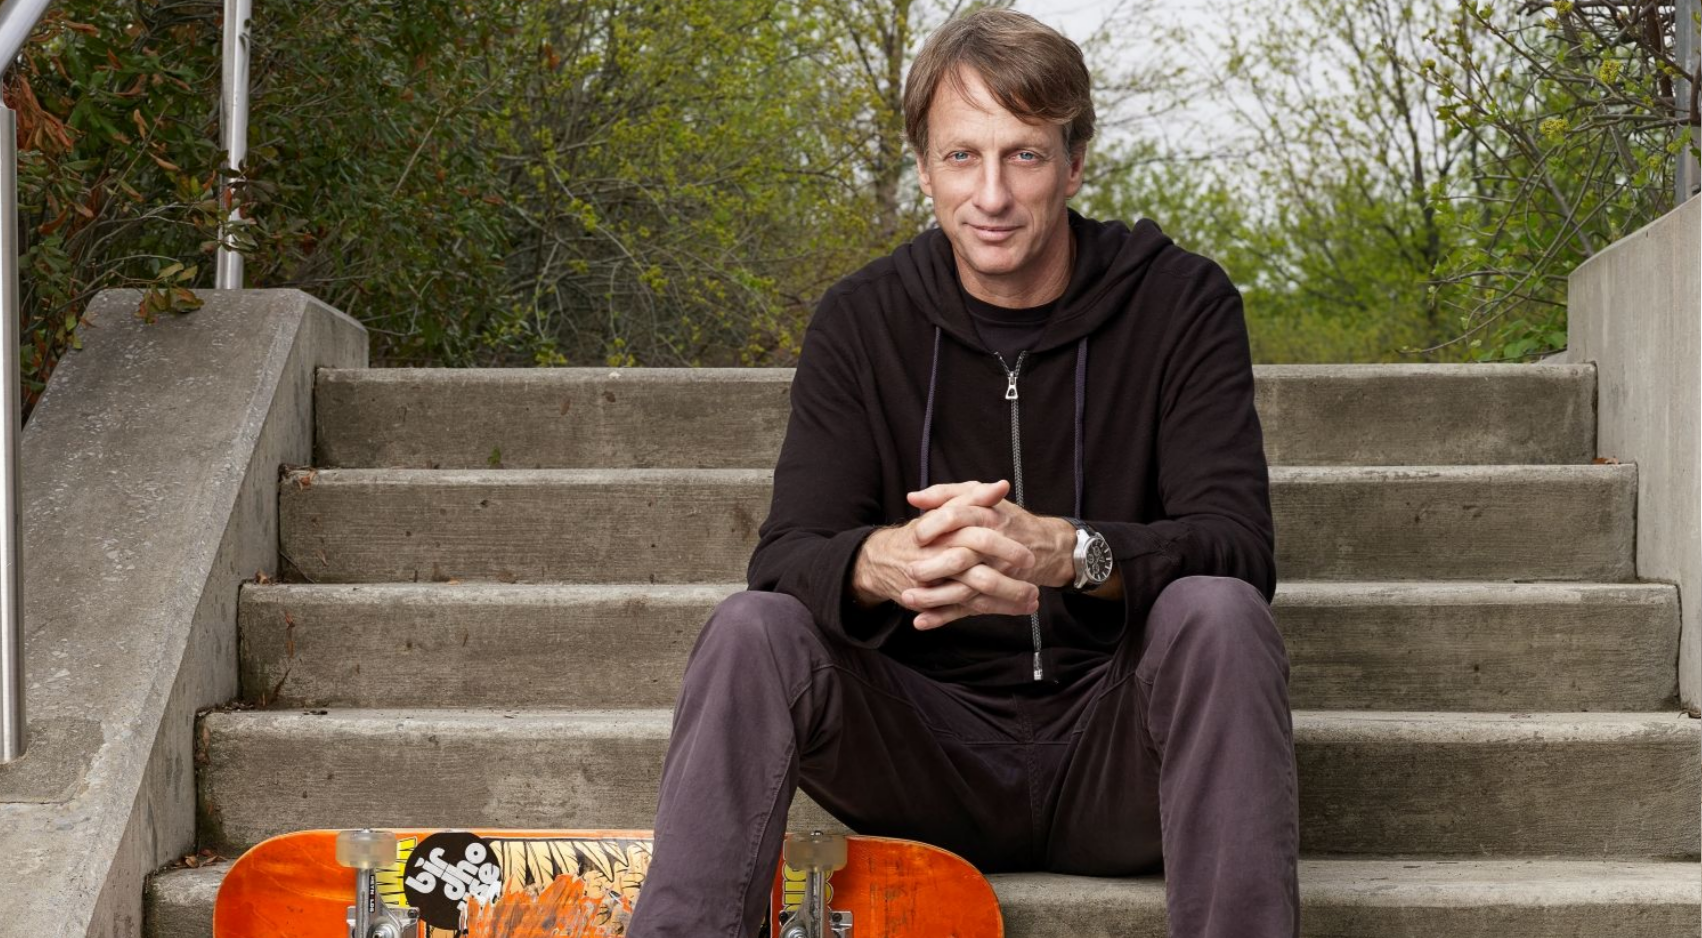 Tony Hawk, above, posed with a skateboard on a staircase. (Photo: Joshua Cutillo)